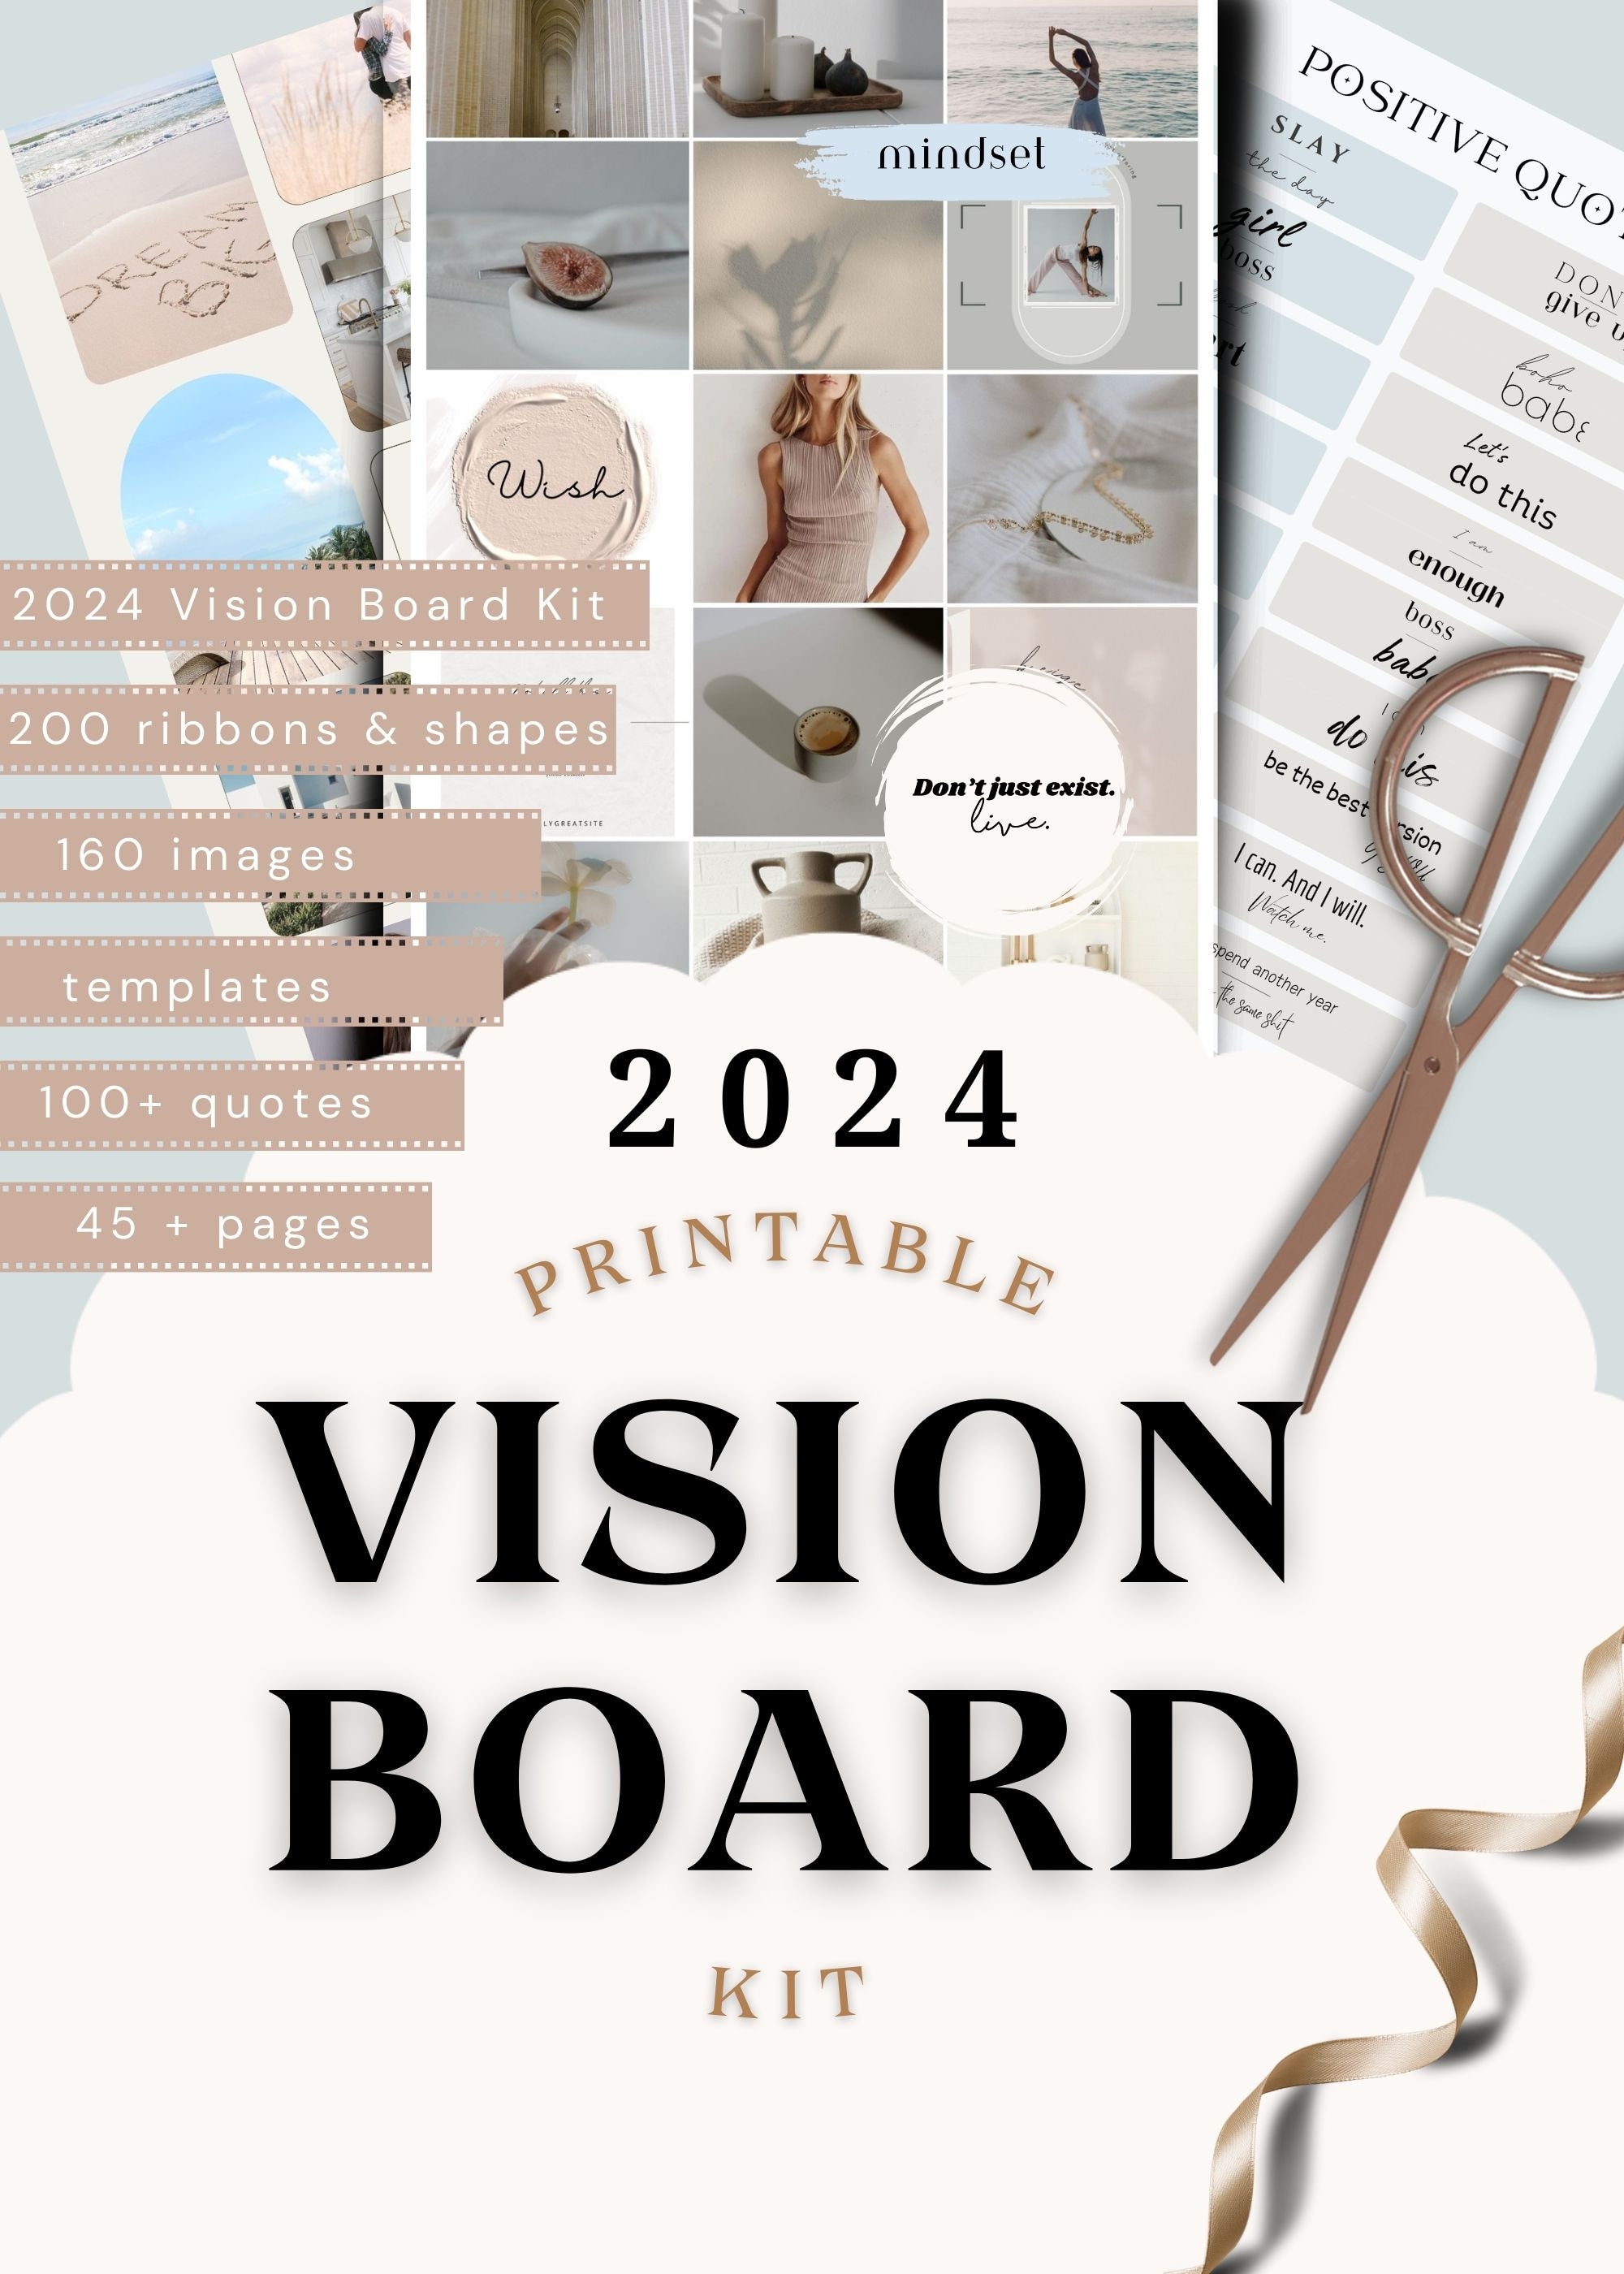 2024 Dream Vision Board Clip Art Book: 500+ Cute Clipart Images, Prompts,  Quotes & Affirmations to Create and Manifest Now Your Future Life  (Magazines